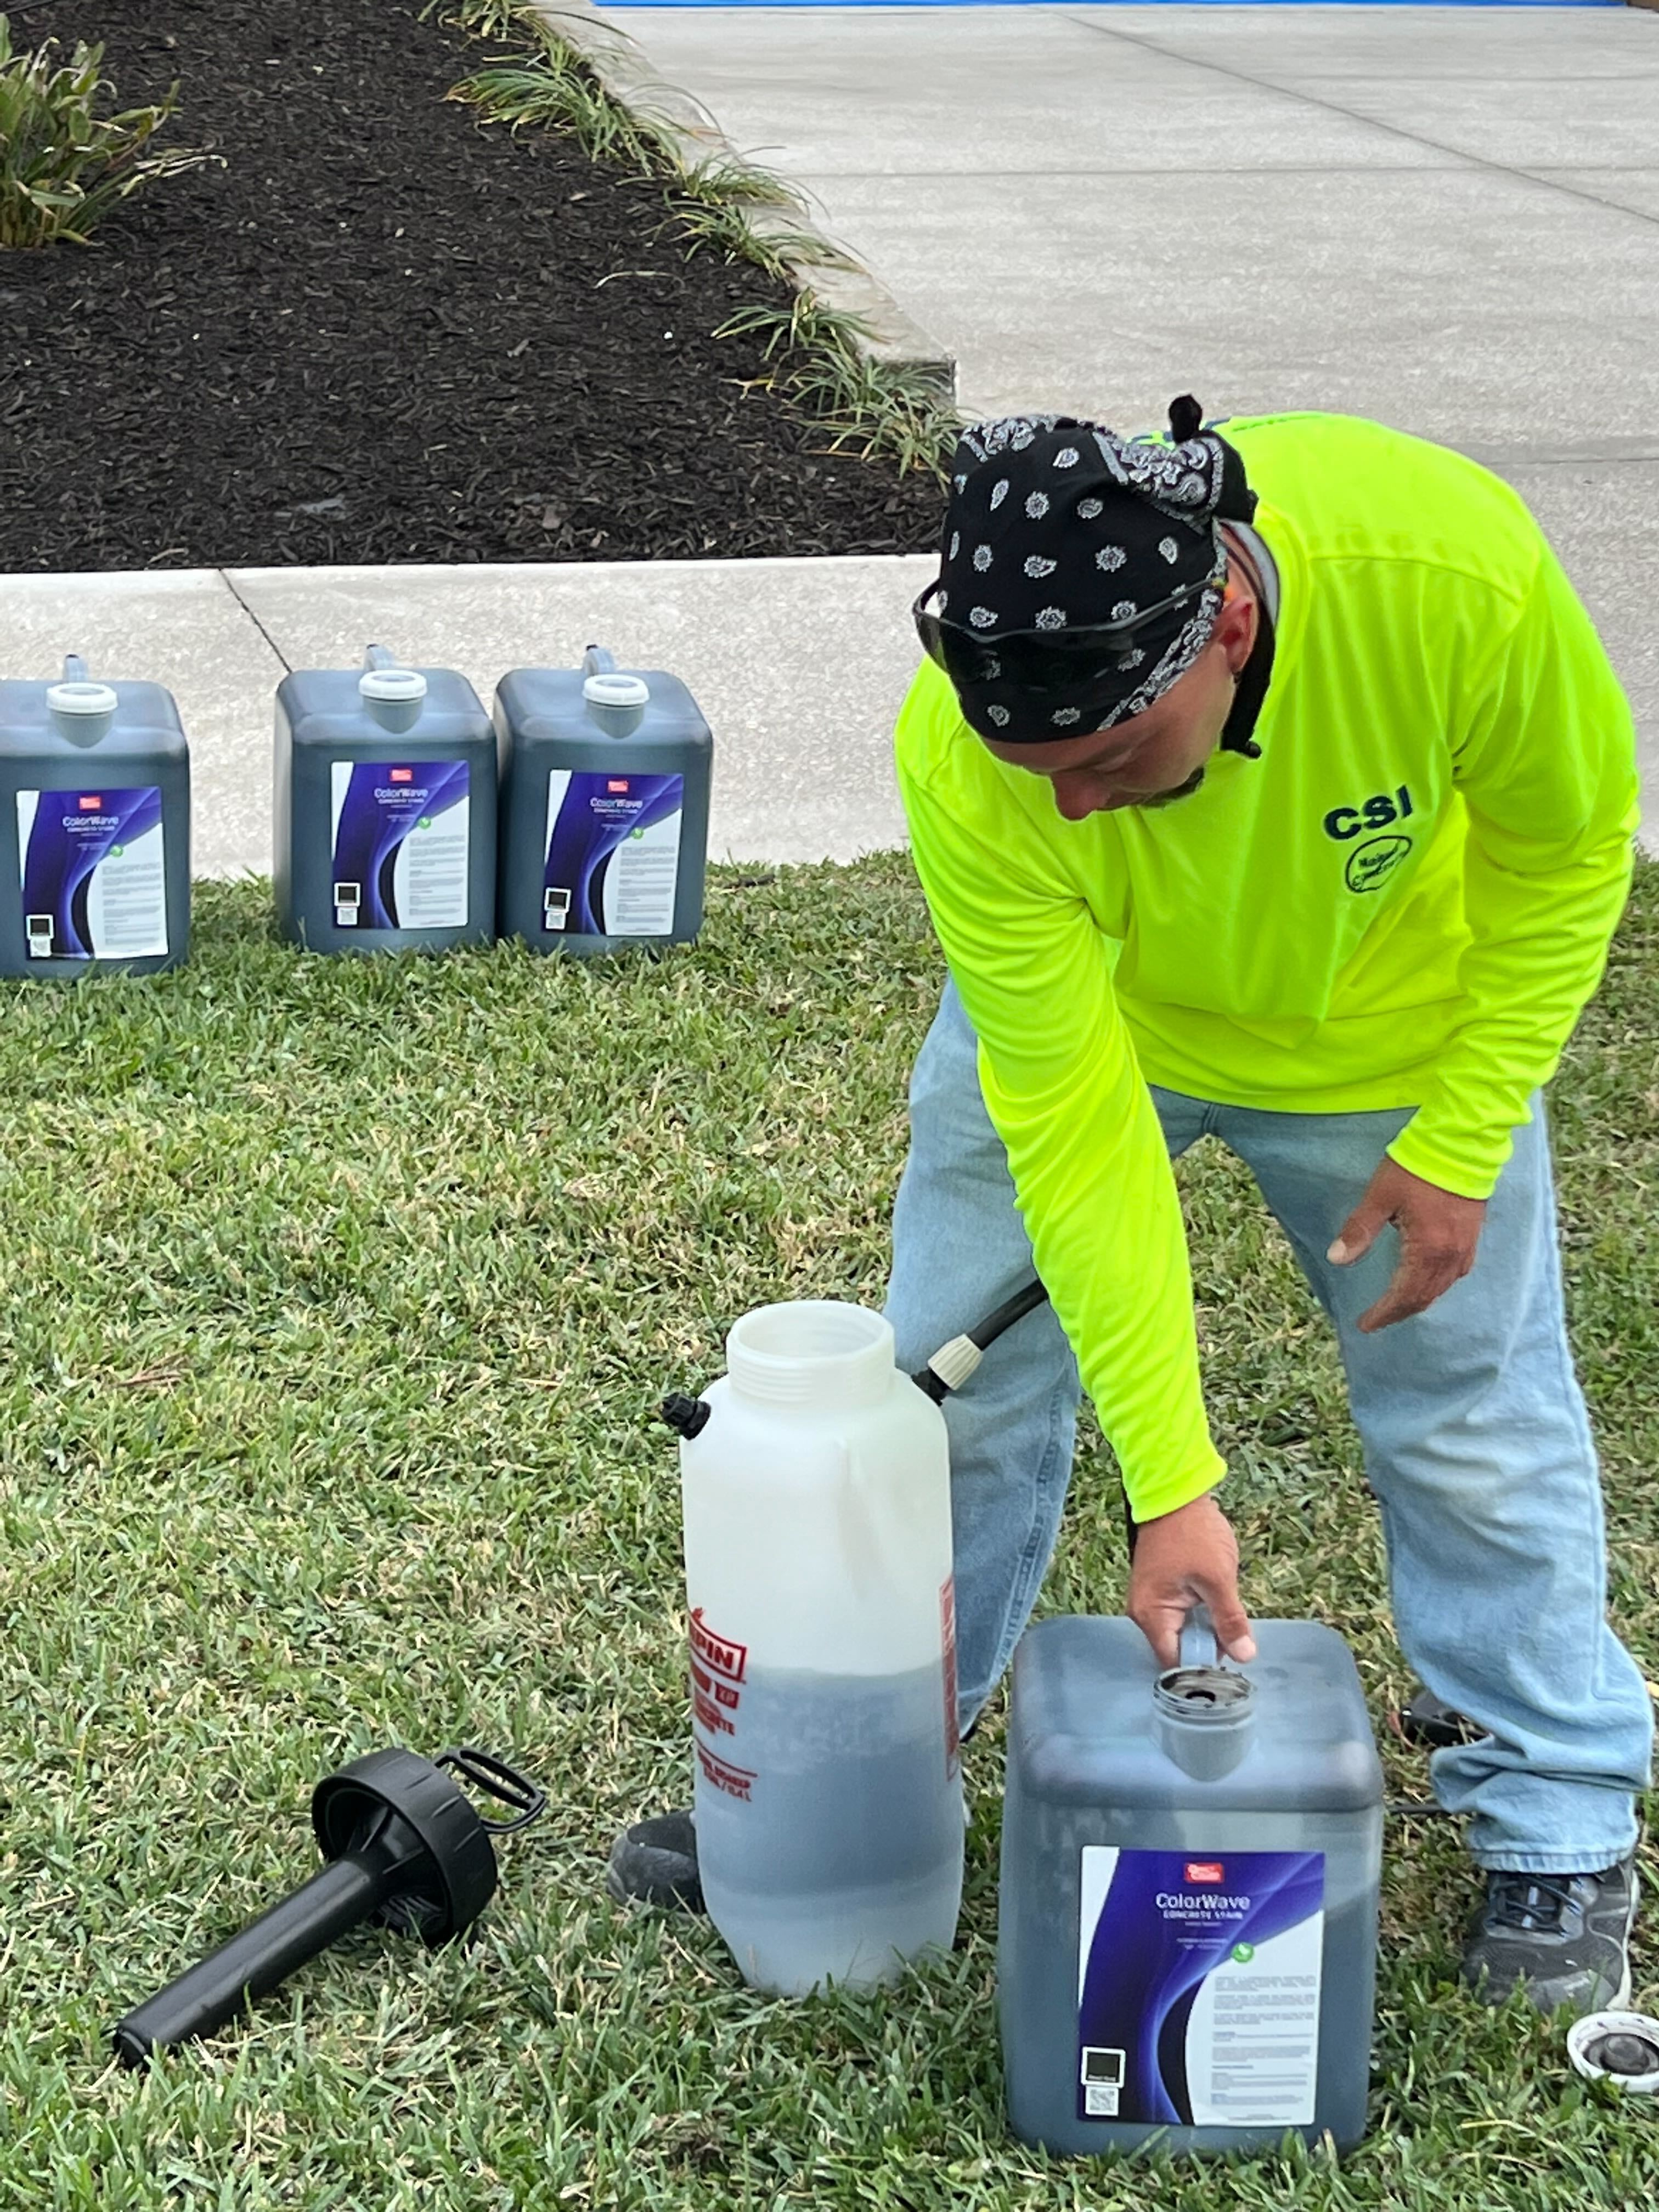 Tyler, the expert contractor, confidently preparing the ColorWave stain in the sprayer for a flawless application on the concrete driveway